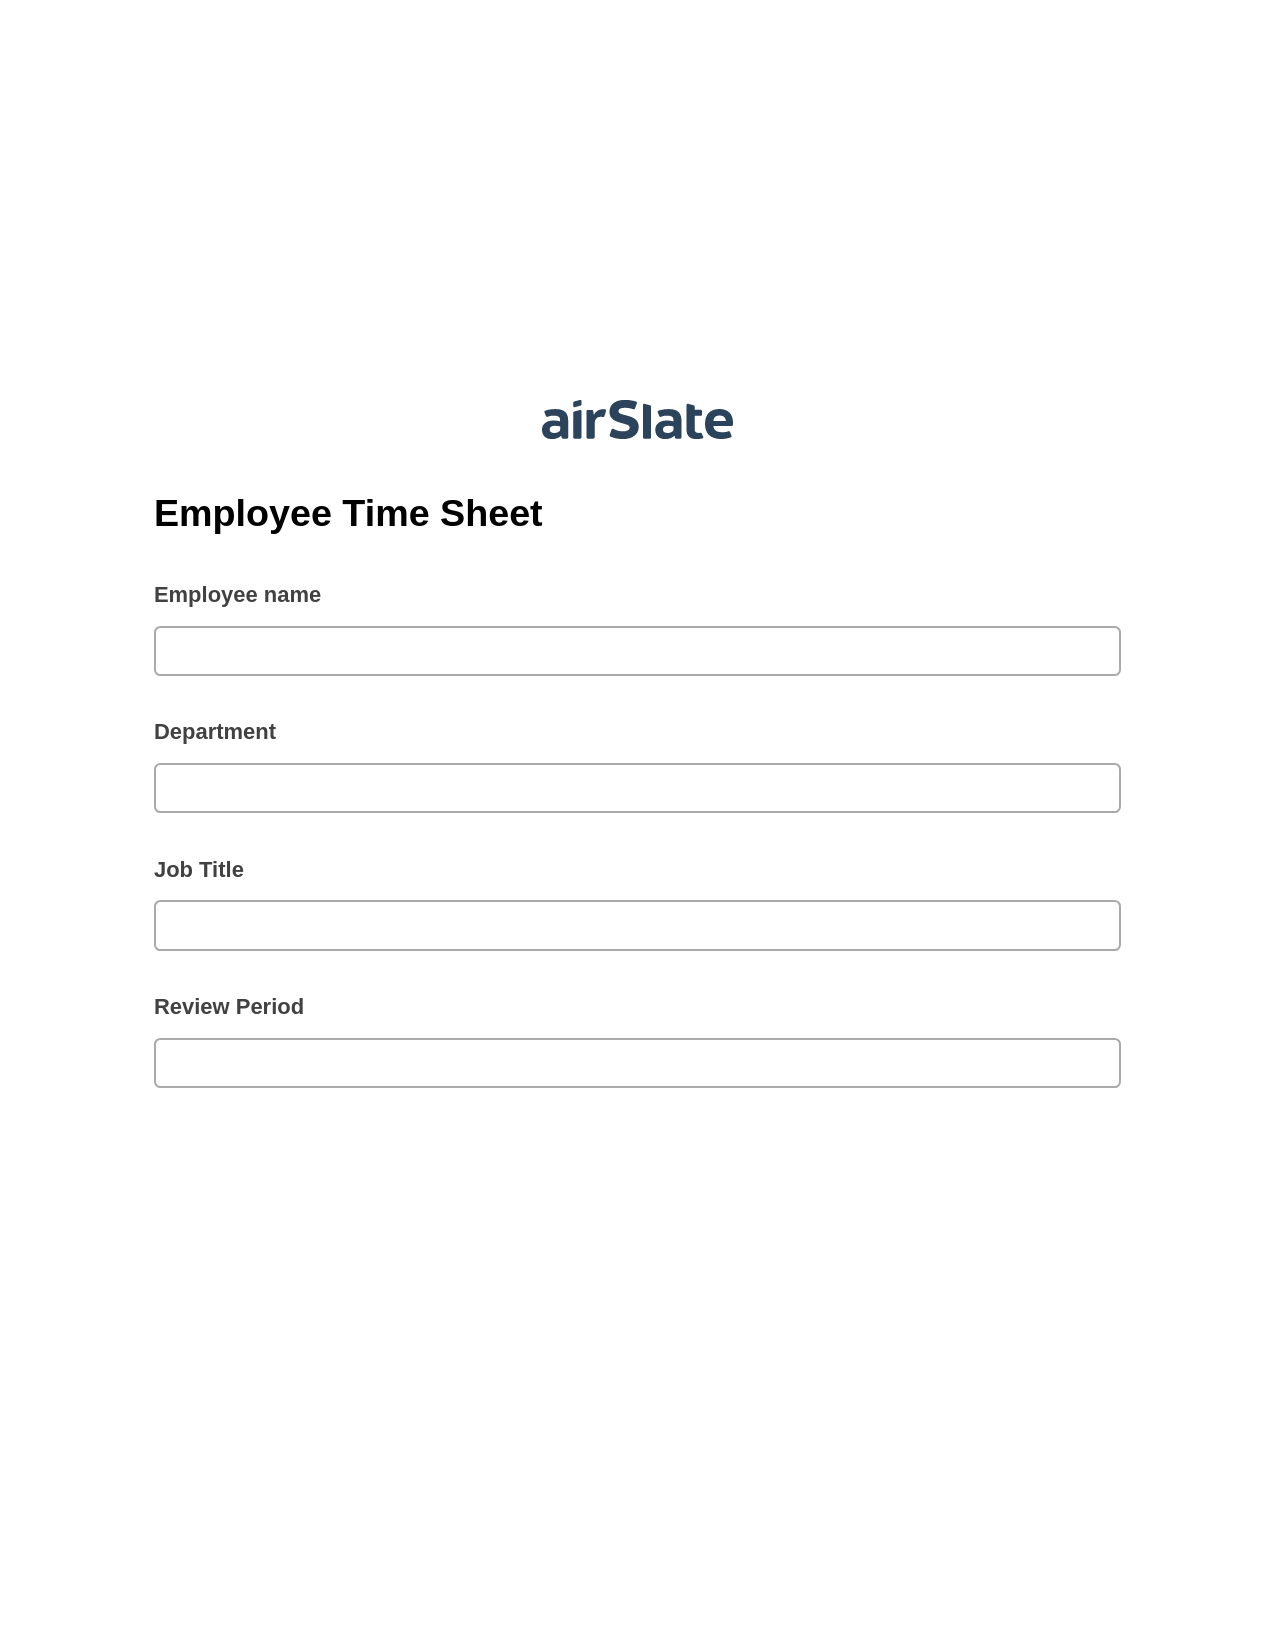 Multirole Employee Time Sheet Pre-fill from AirTable Bot, Create slate addon, Export to Salesforce Record Bot